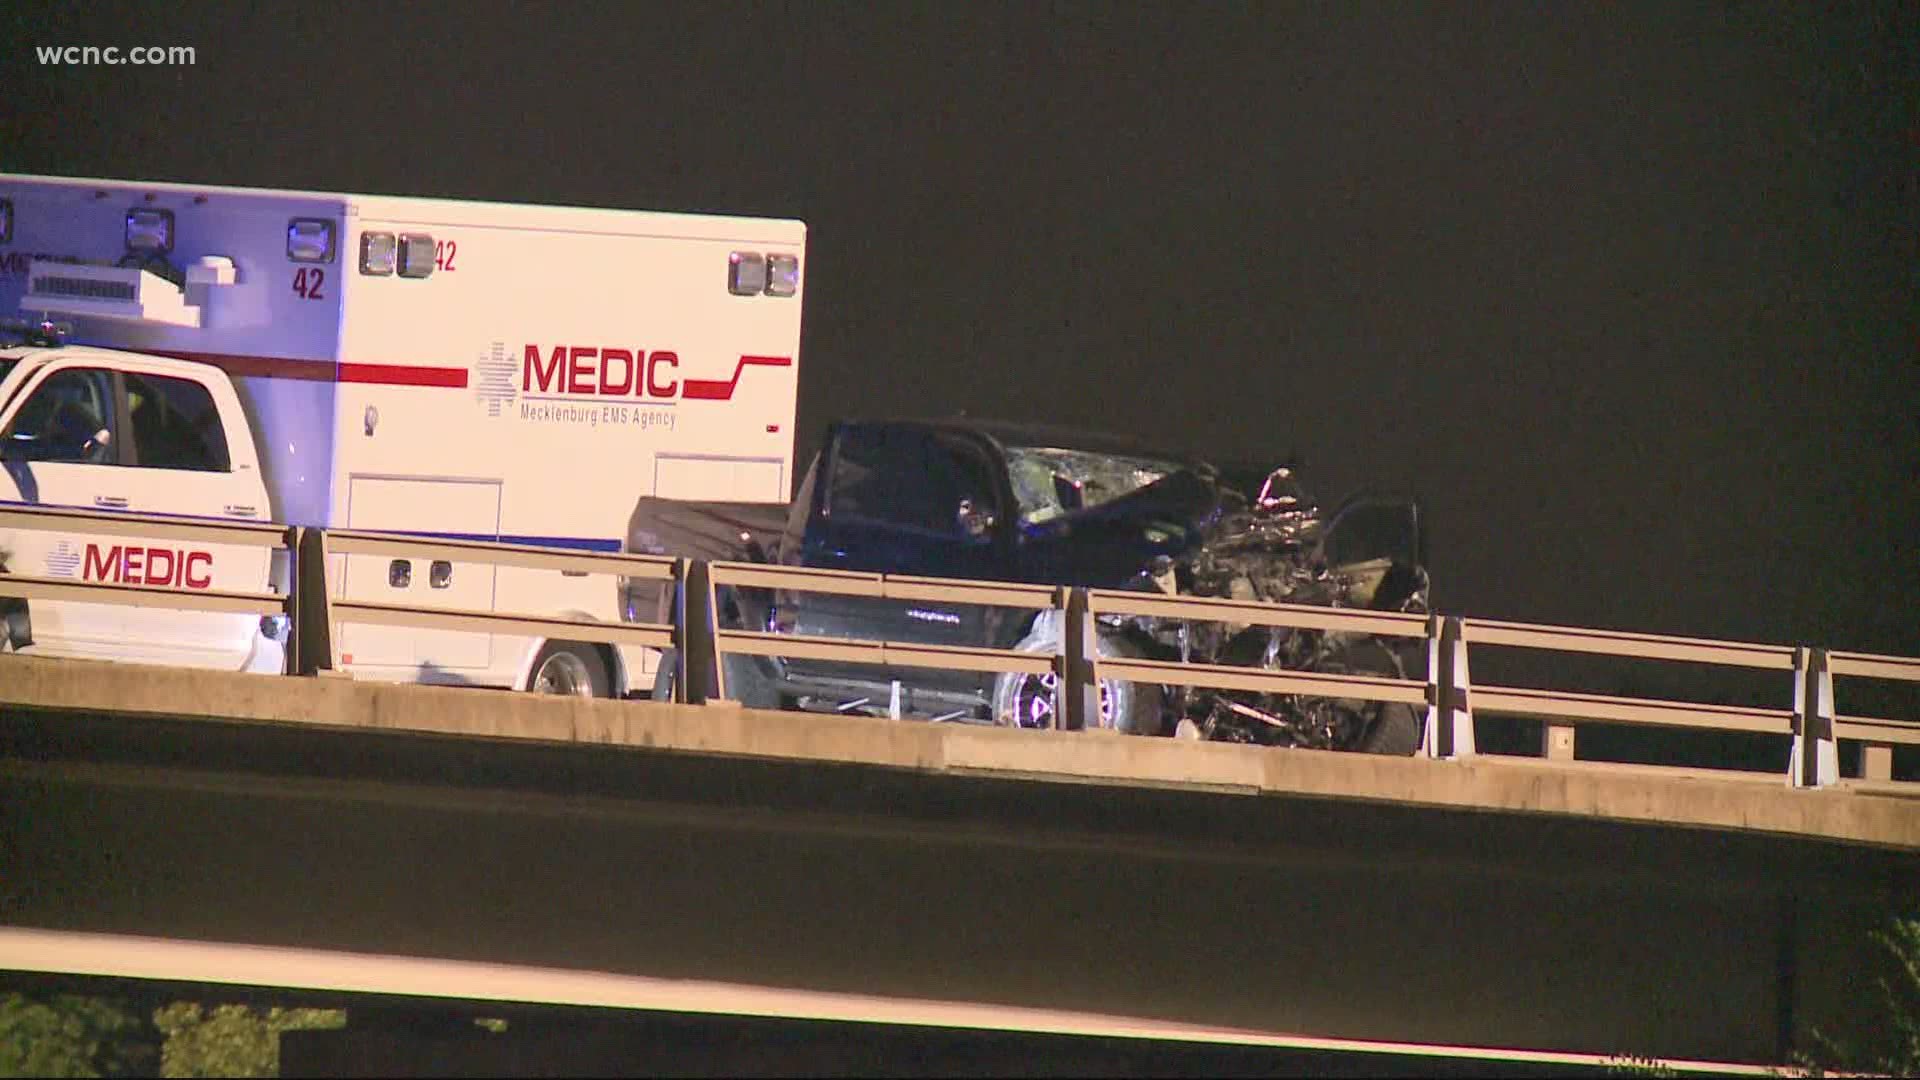 Police are investigating after an ambulance was involved in a wrong-way crash just outside uptown early Monday morning.